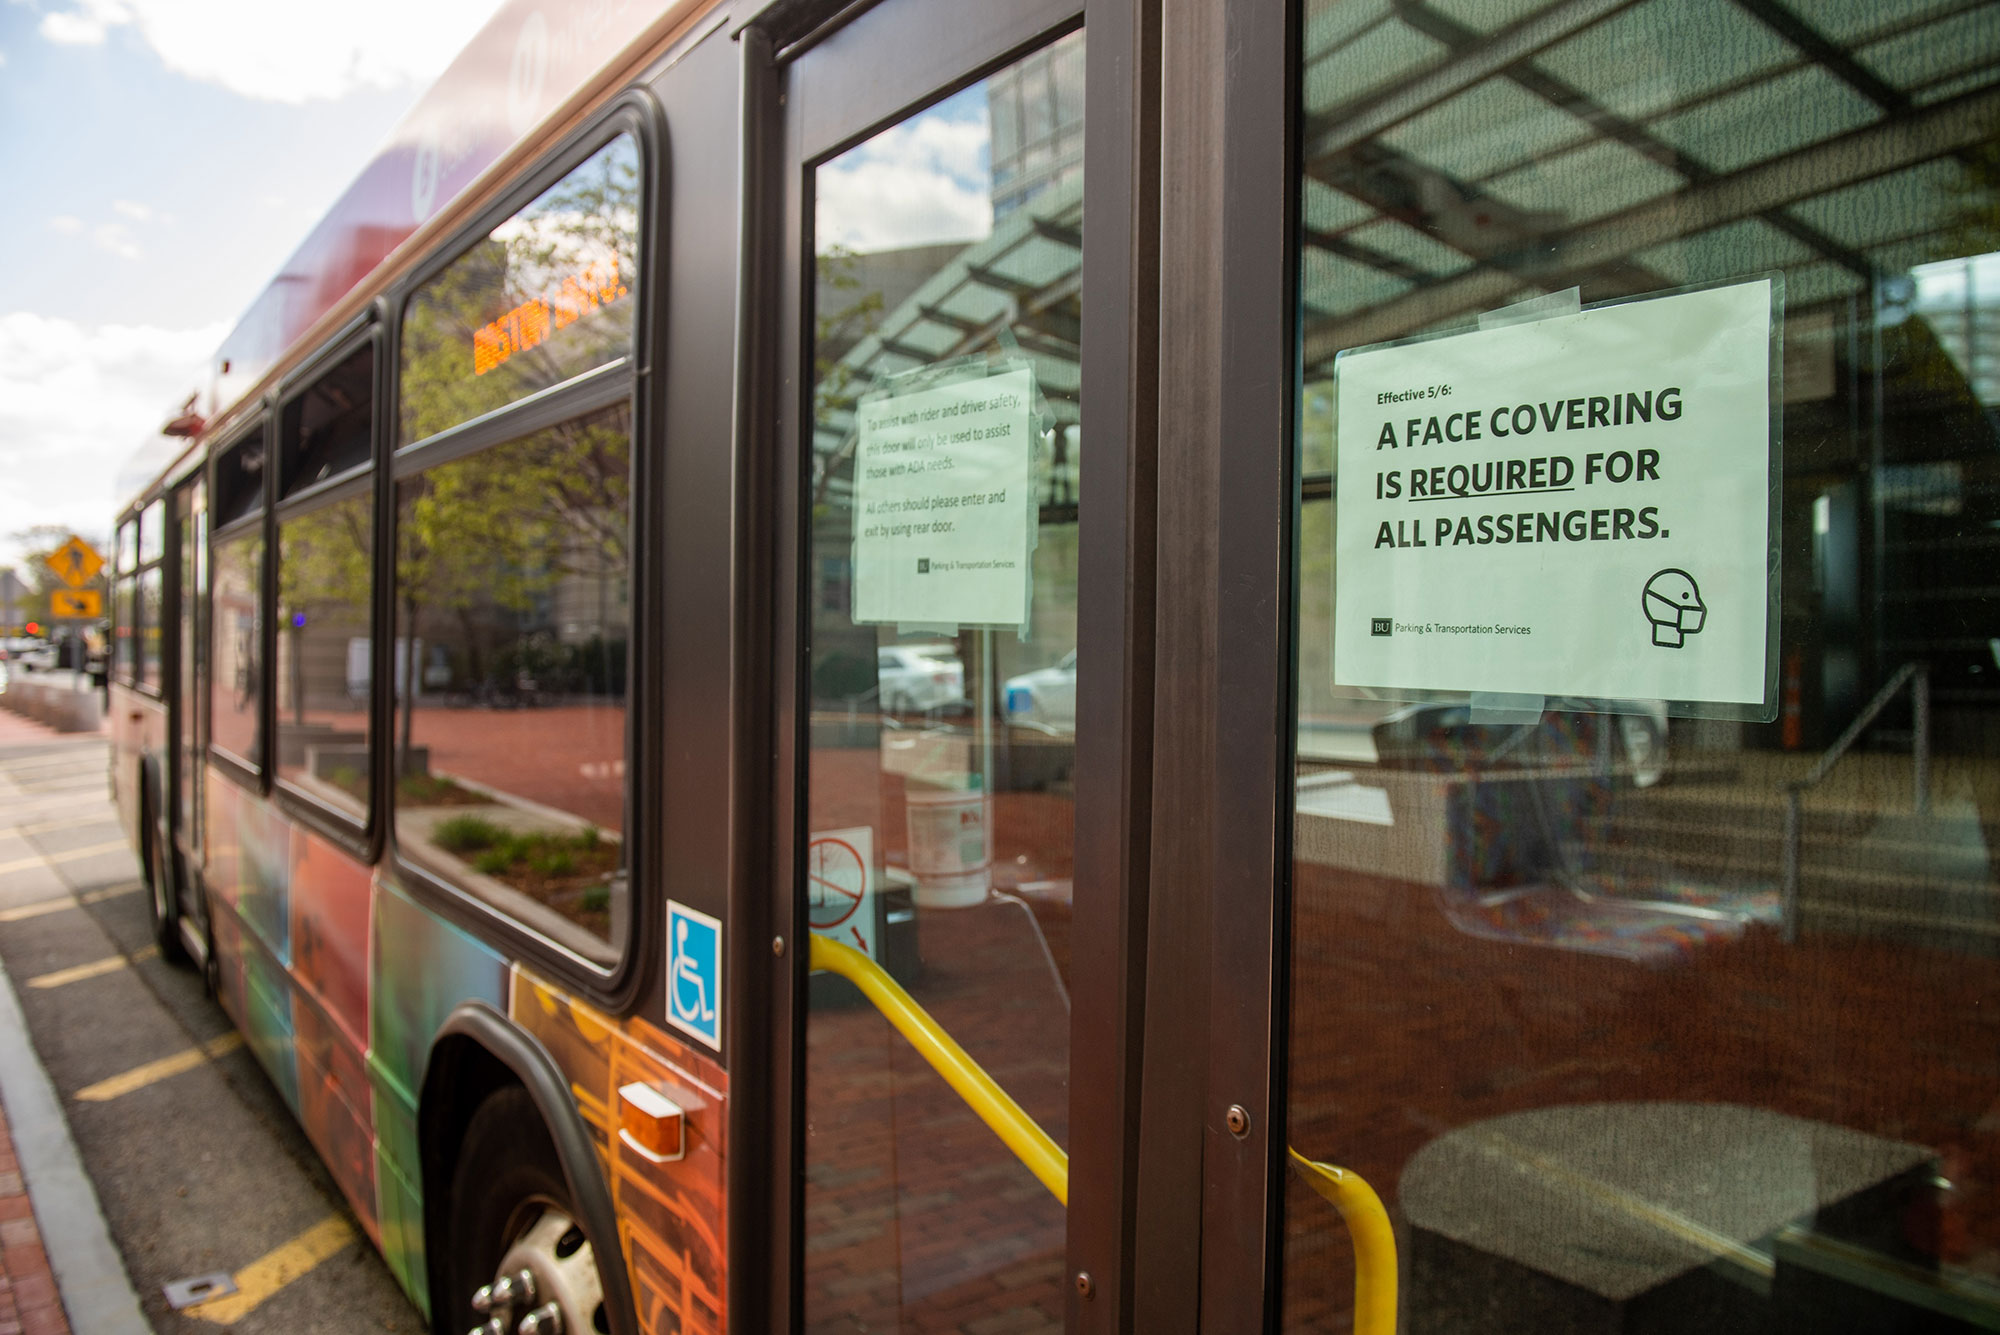 Photo of a red BU Bus with a sign that reads "A face covering is required for all passengers"